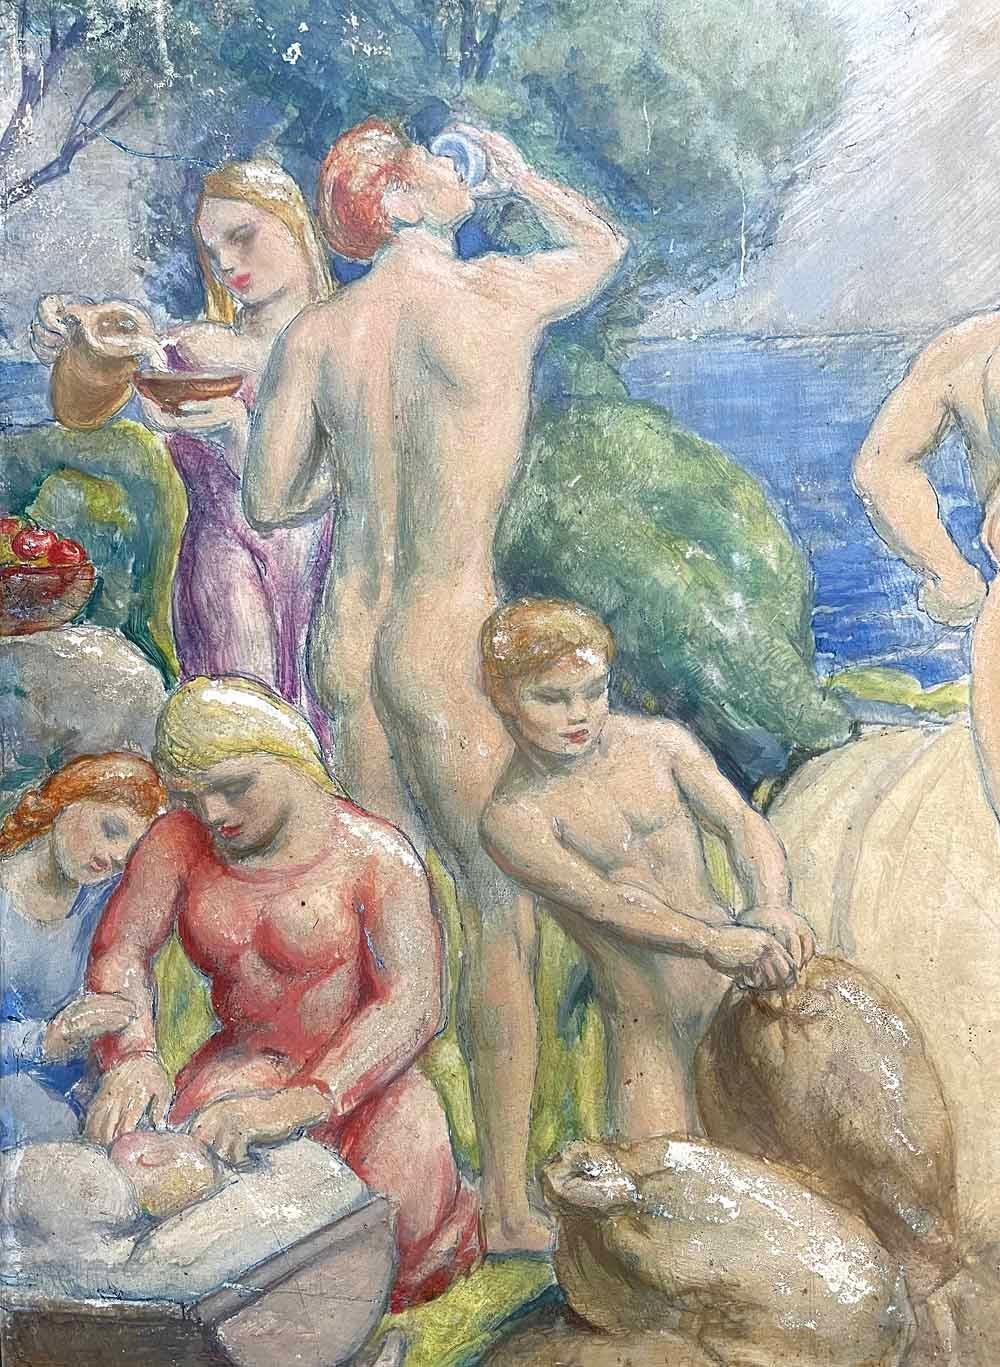 Because Joseph Mortimer Lichtenauer is best known for his public murals, it's not surprising that this easel painting -- with its frieze-like array of nude and Classically dressed figures stretching across the scene -- has a mural-like quality.  The